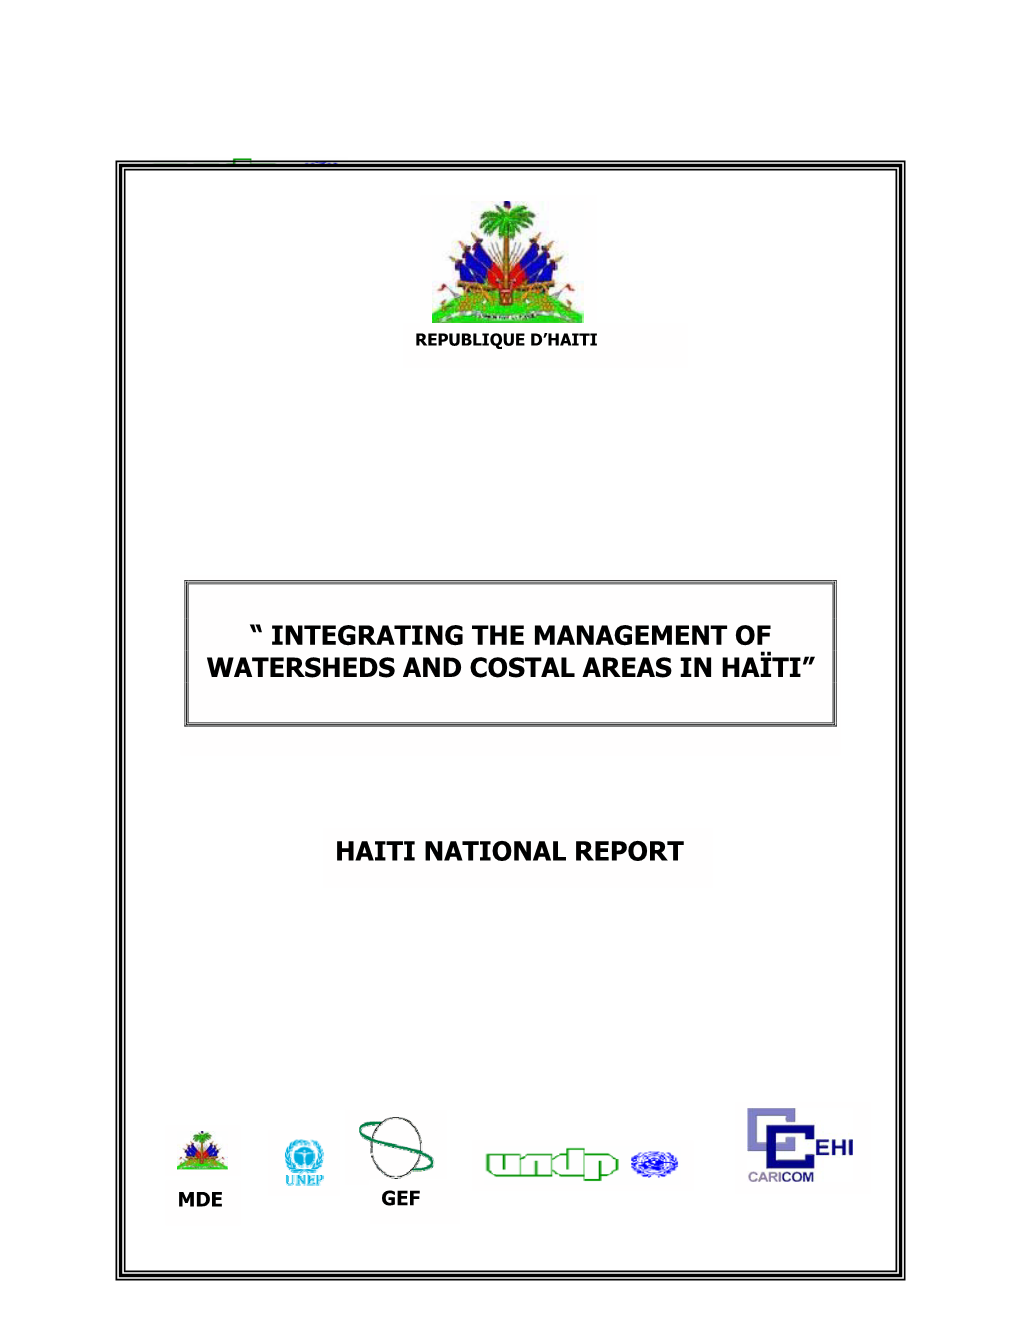 National Report on Integrating the Management of Watersheds and Coastal Areas in Haiti.Pdf